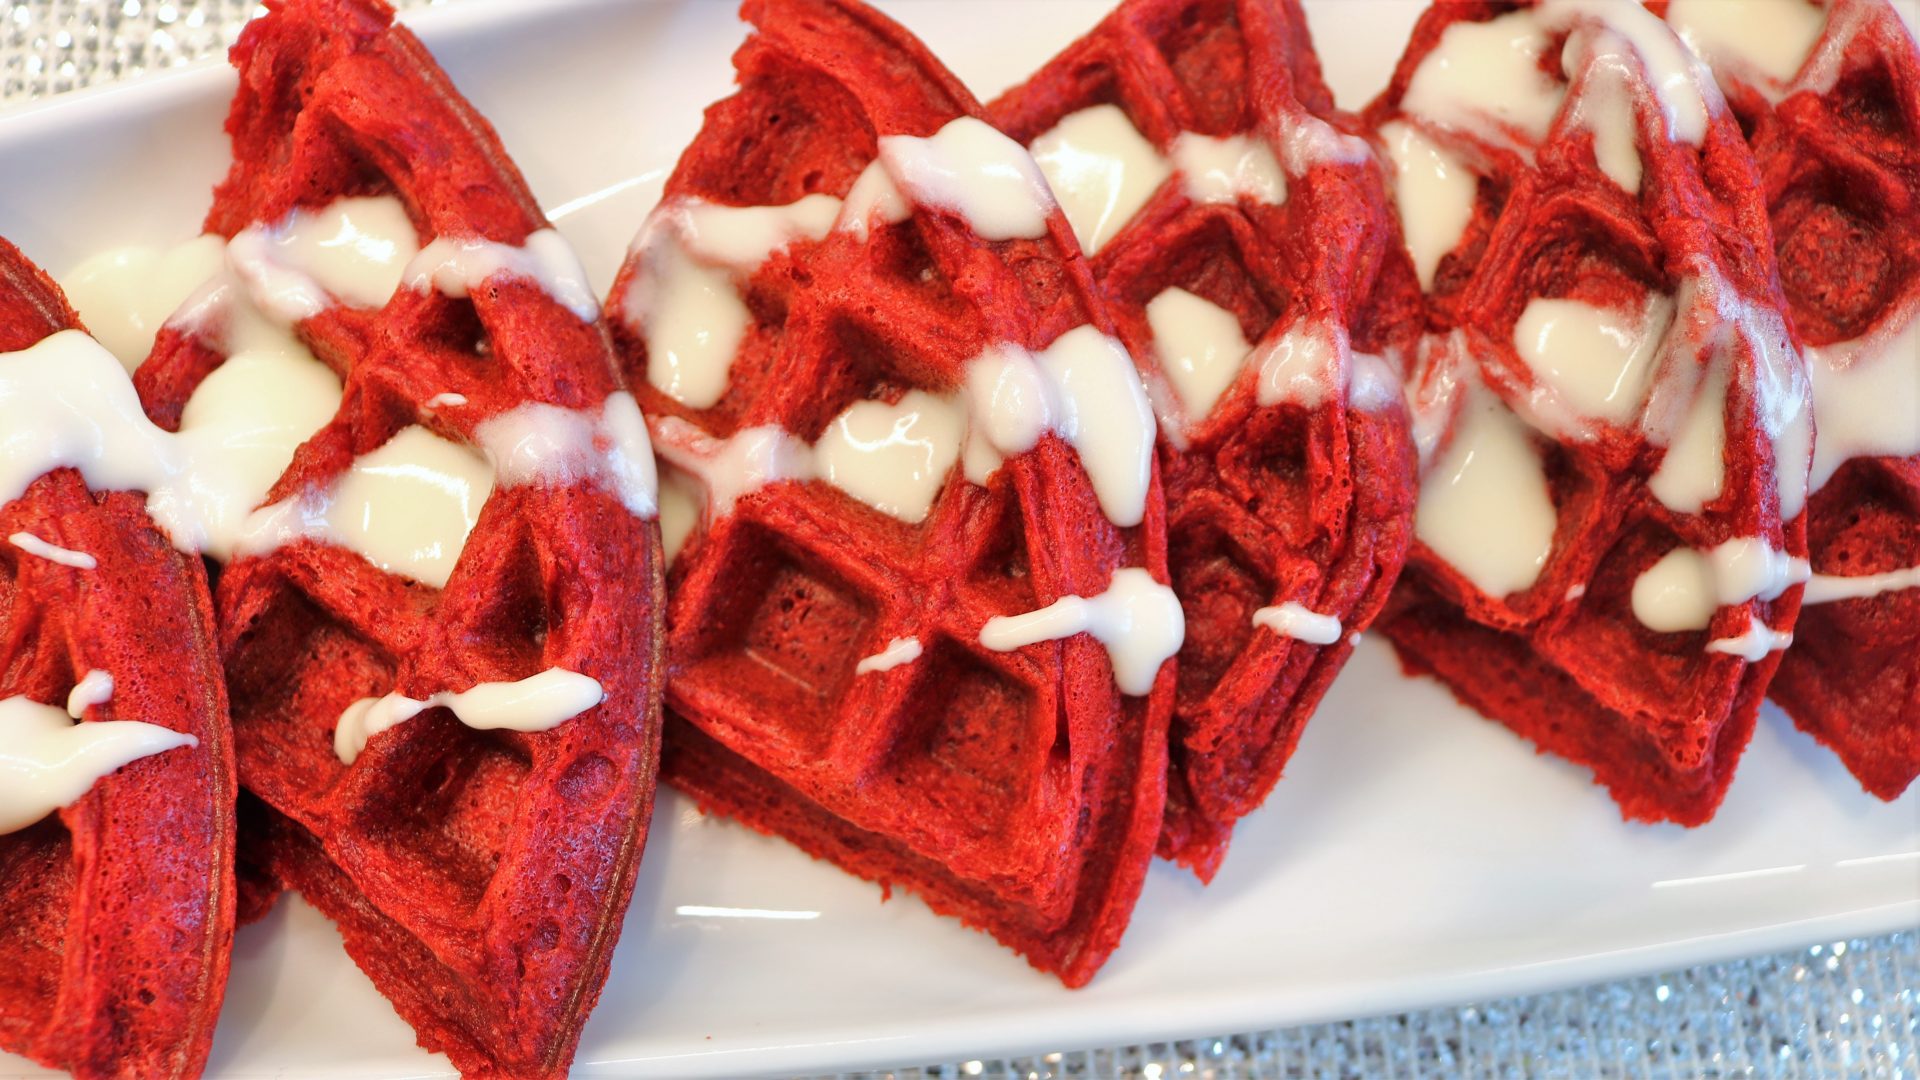 A plate of red velvet waffles with white frosting.